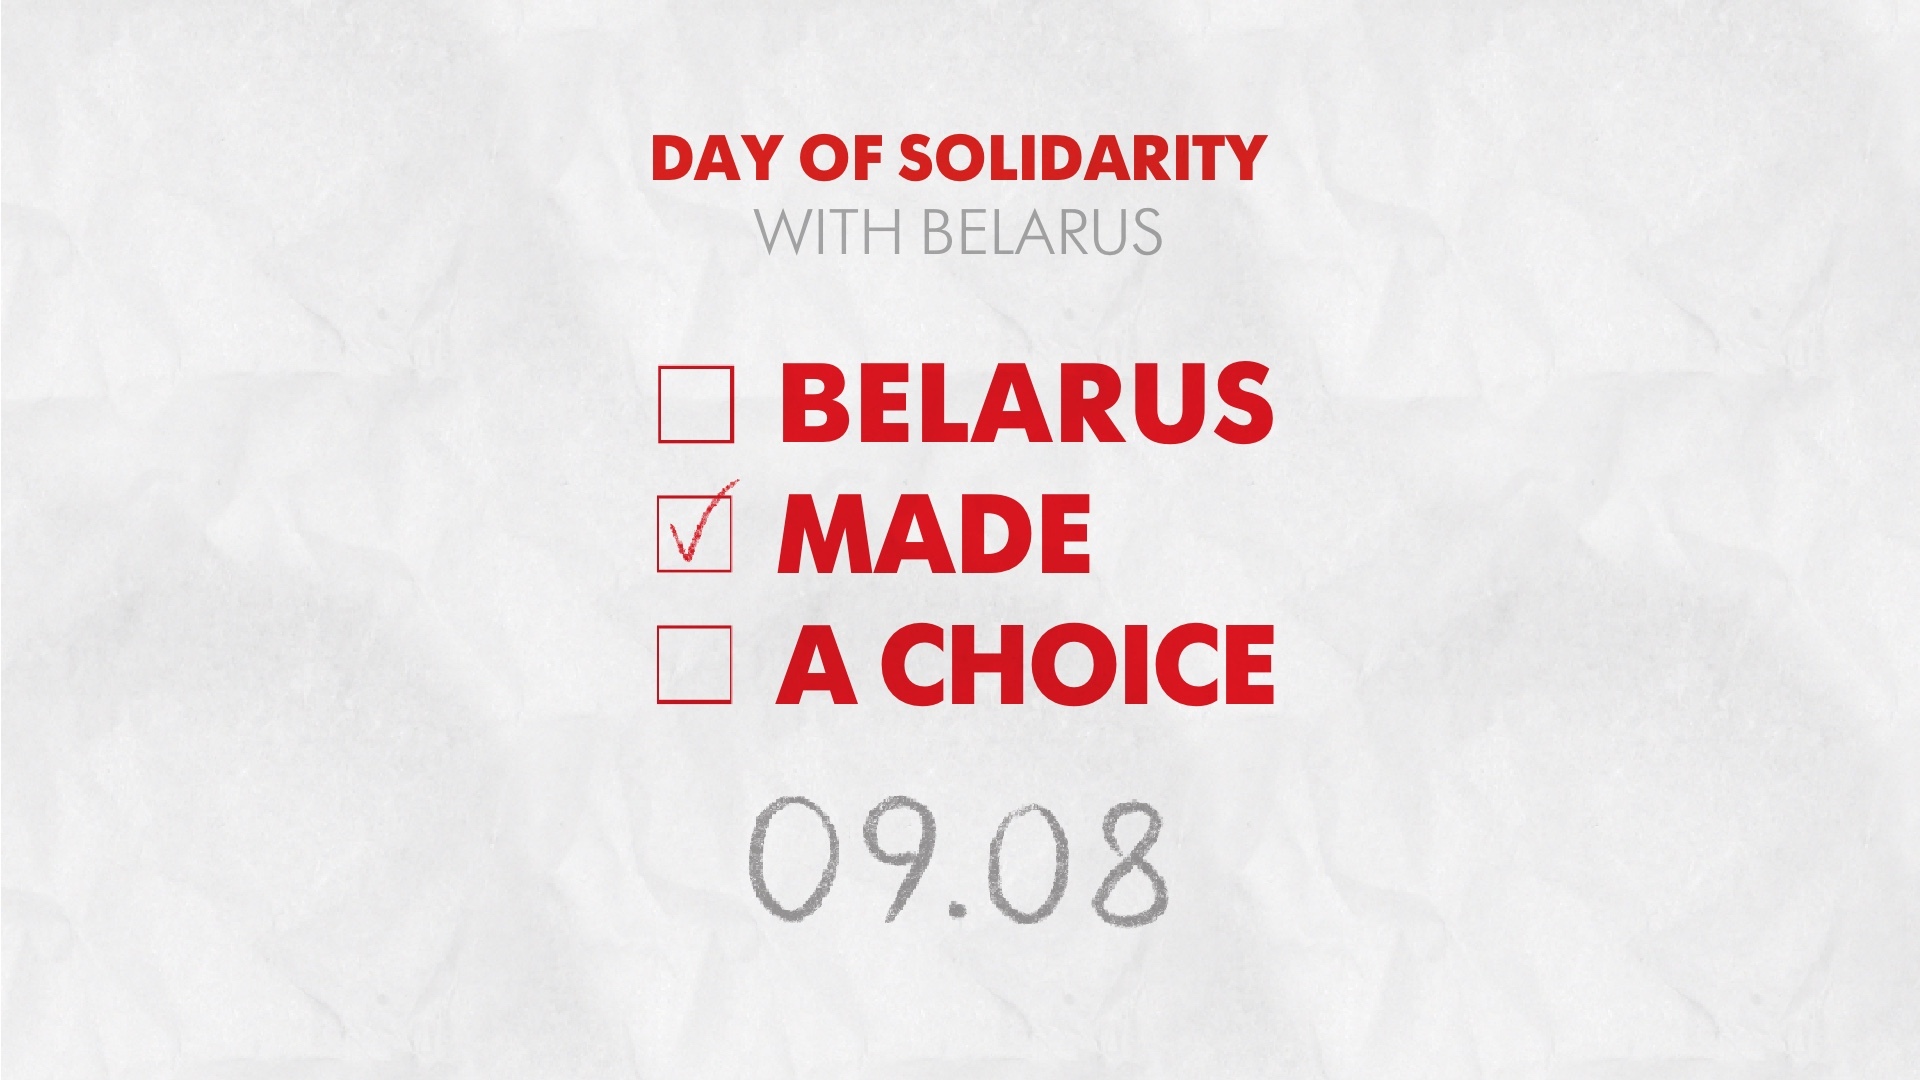 August 9 marks one year anniversary of peaceful protests movement in Belarus